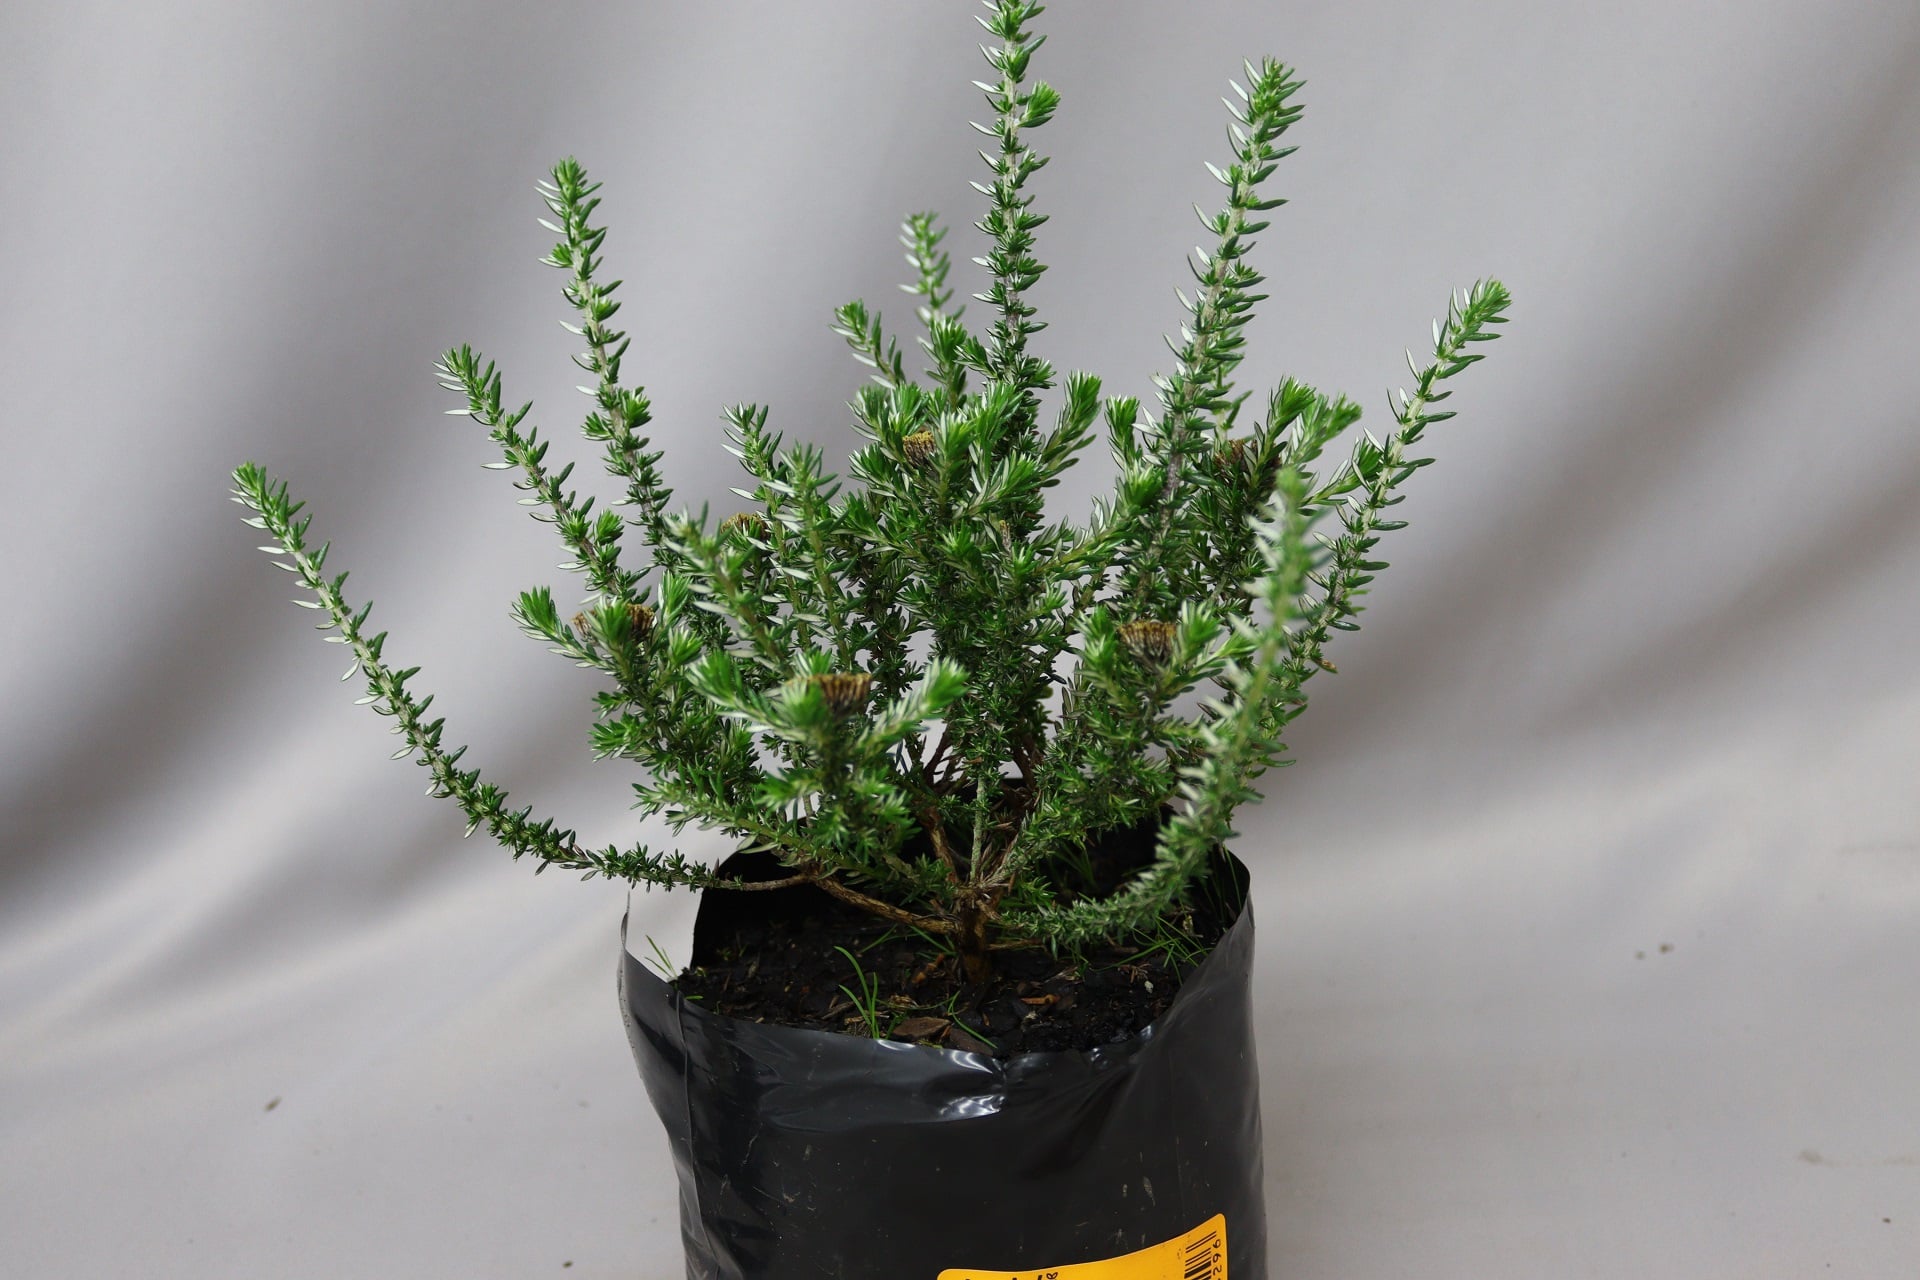 A Metalasia Aurea plant with feathery green foliage in a black plastic container.